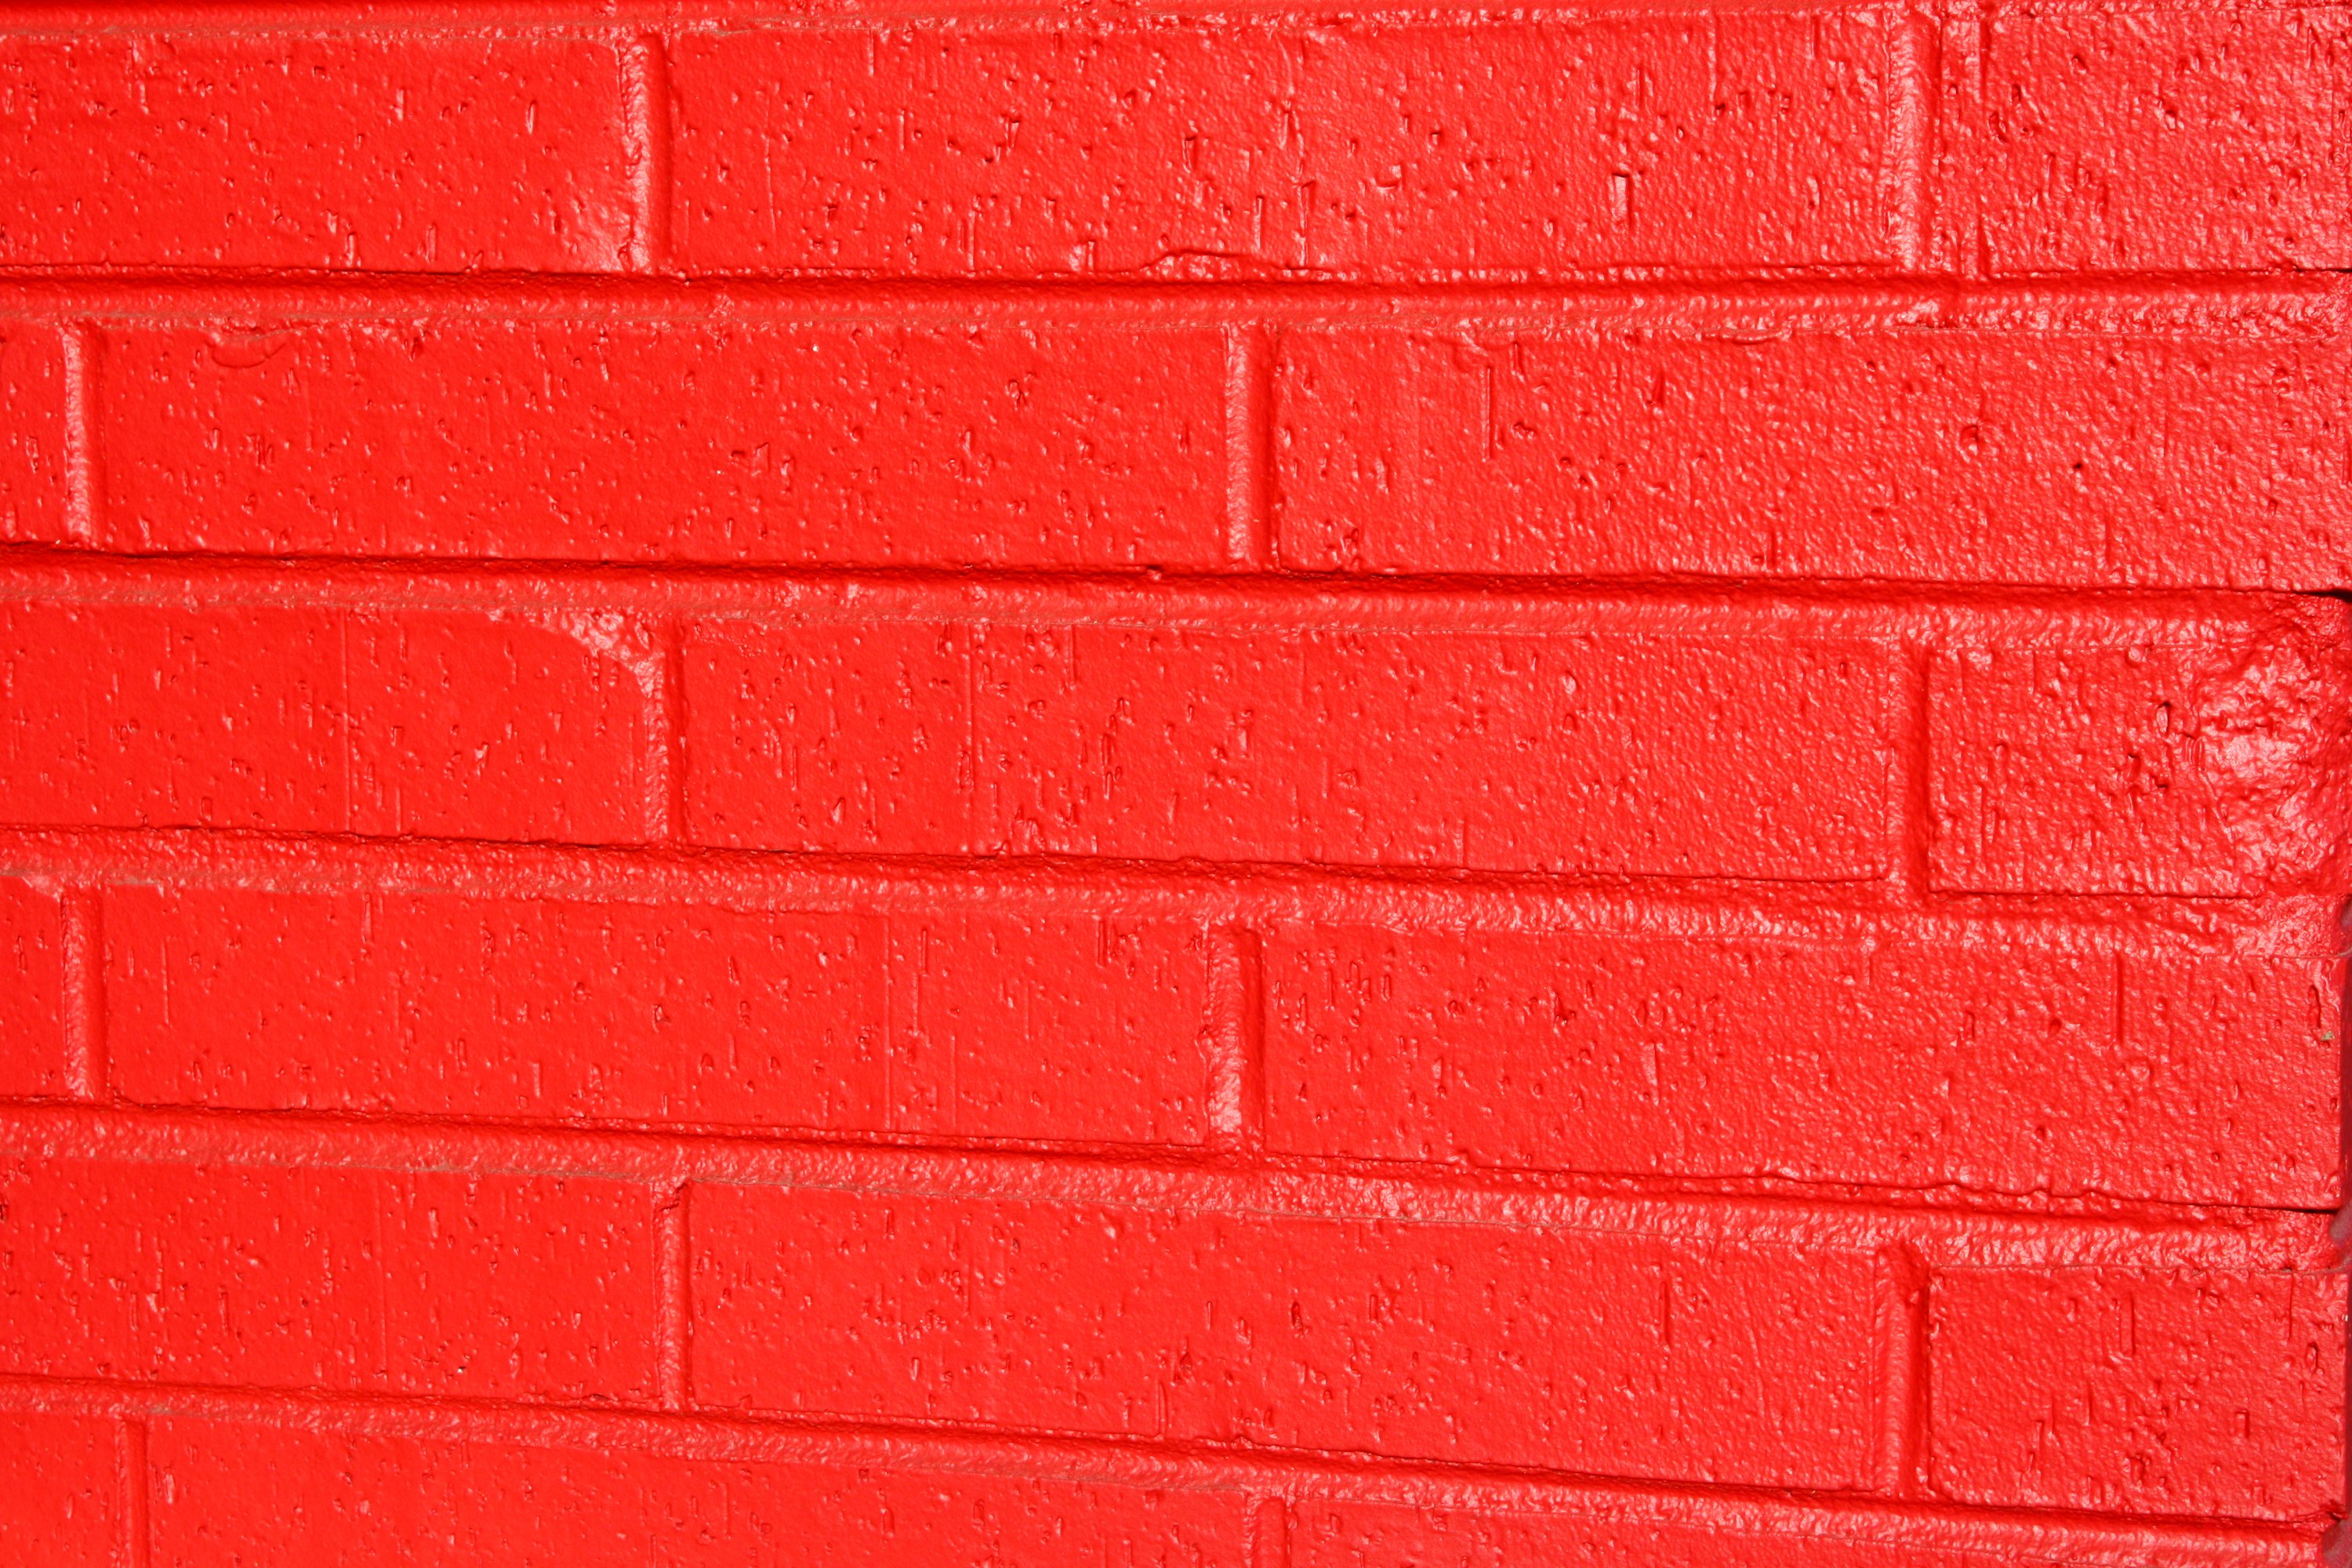 Photograph Features A Close Up Of Brick Wall That Has Been Painted